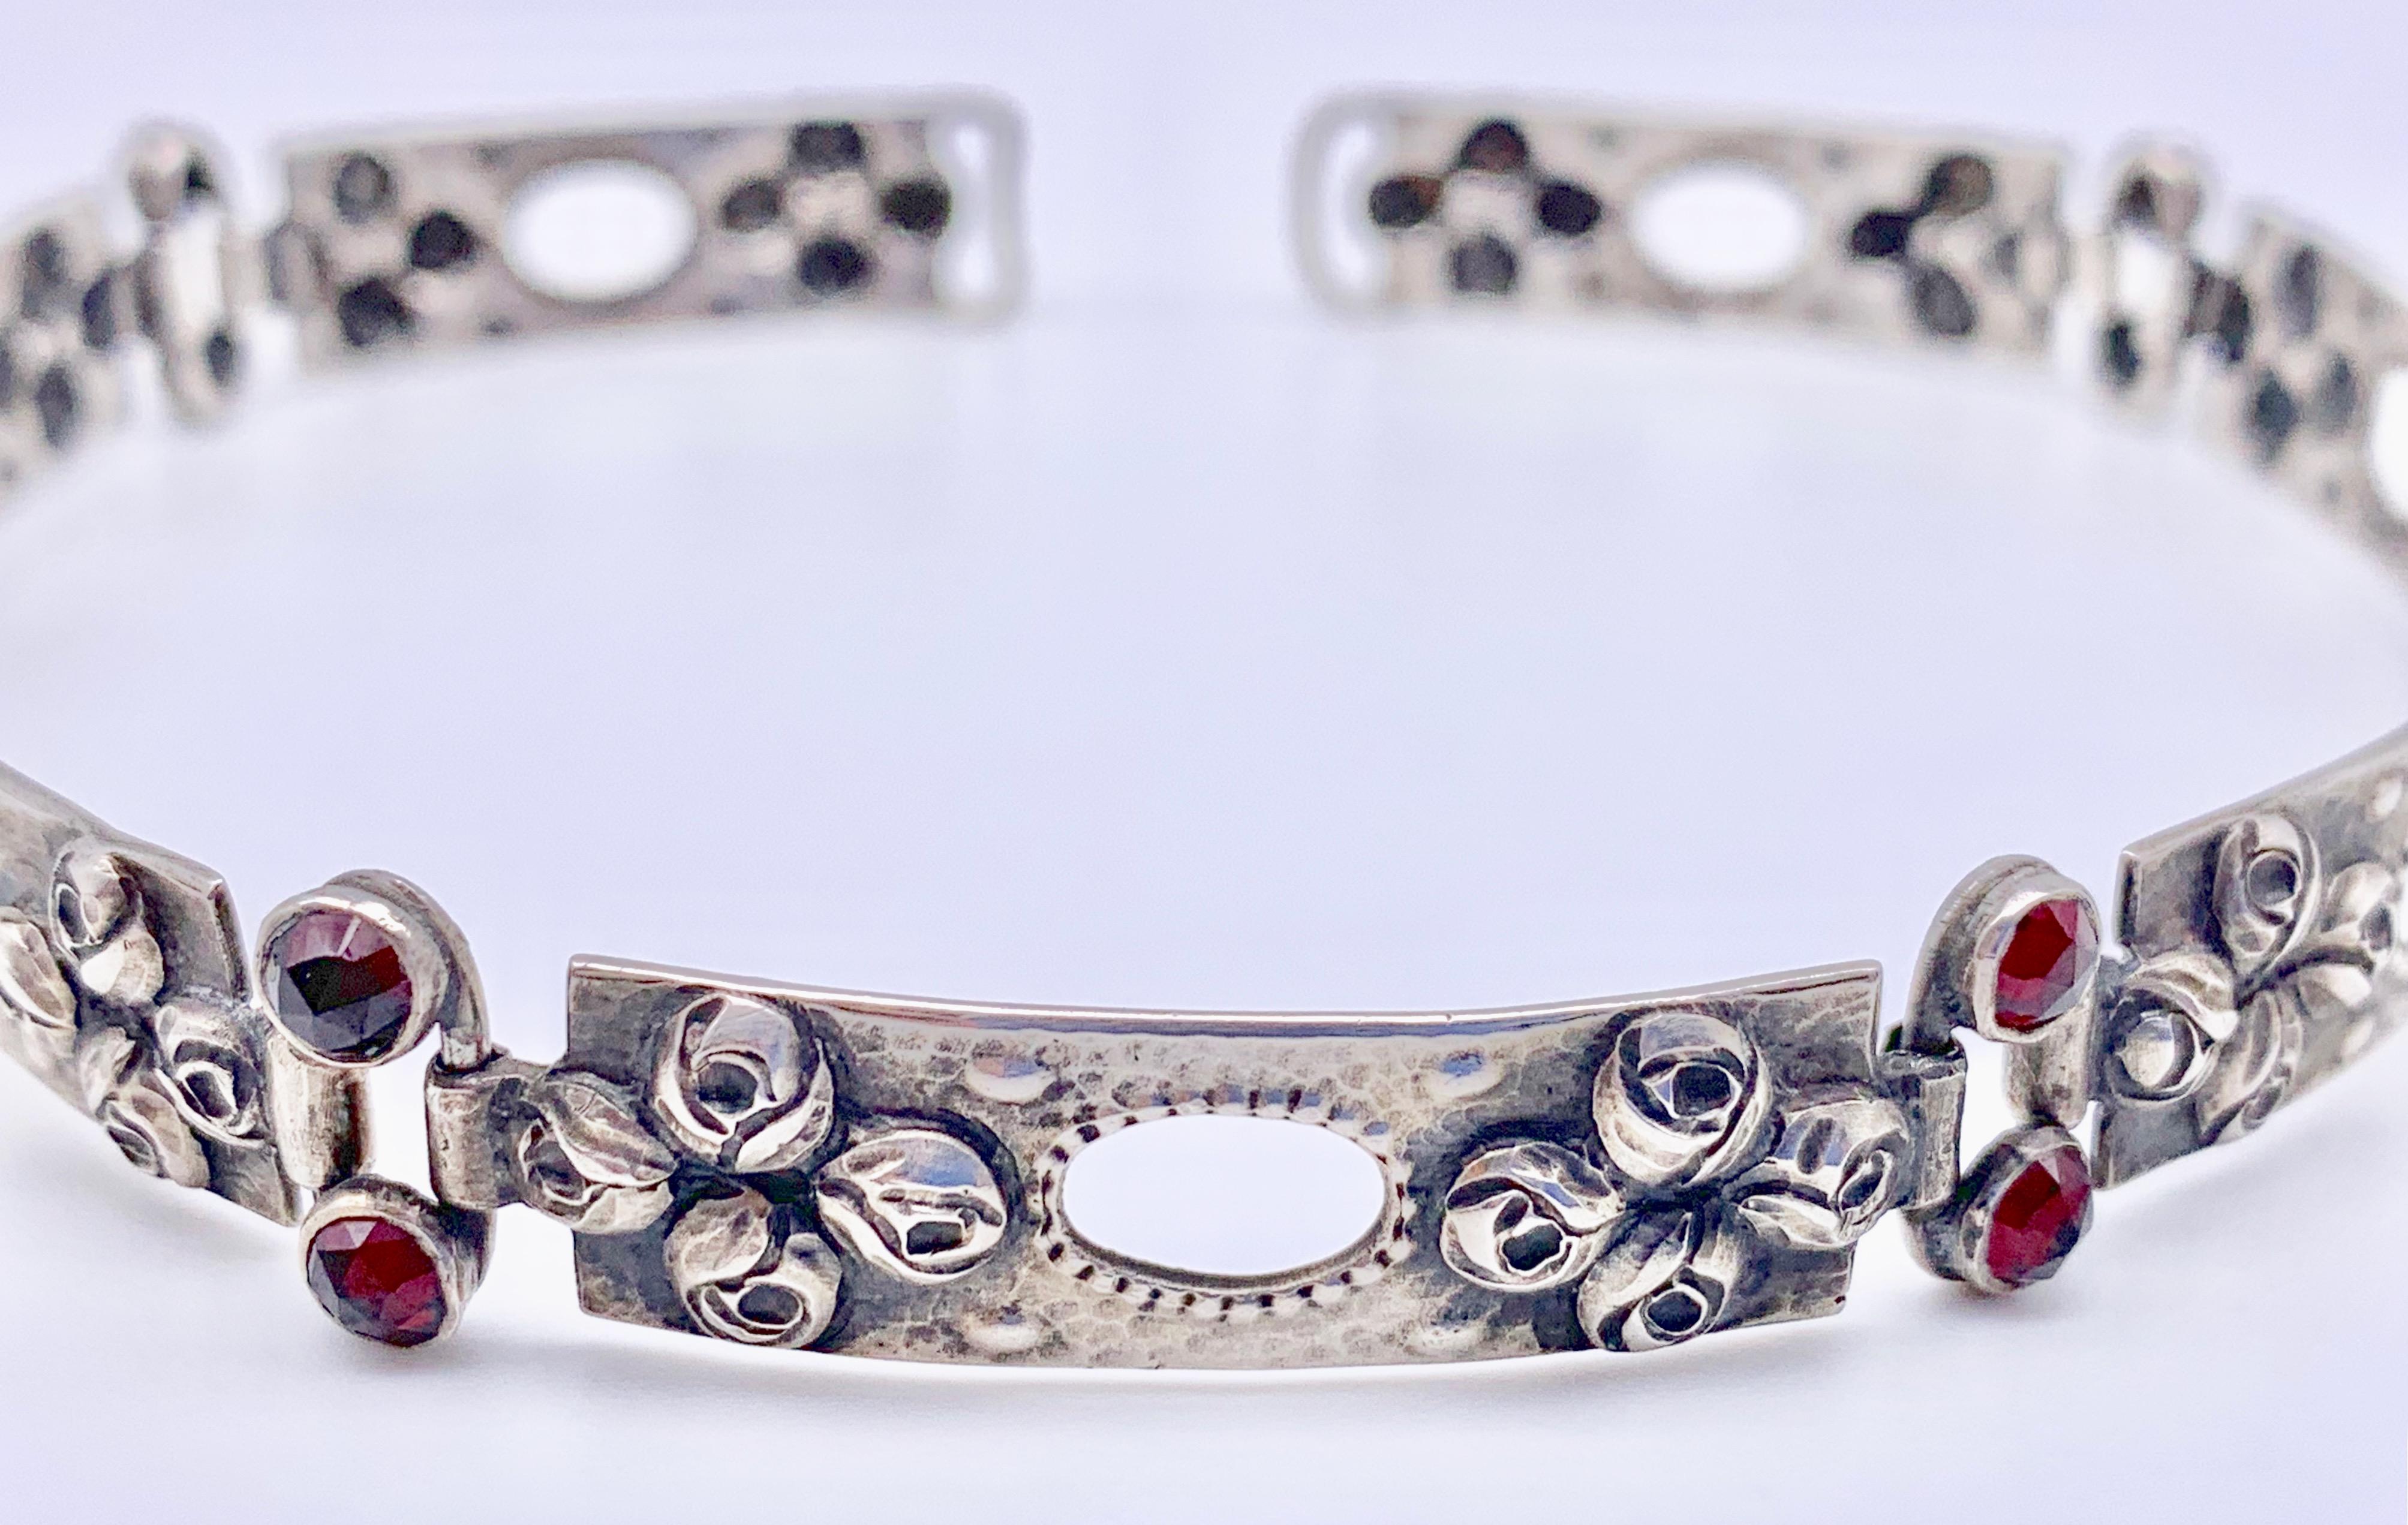 The elegant choker is made out of flexible silver segments and can also be worn set onto a coloured ribbon which will show through the oval cut outs of each segment. The larger segments feature four finely modelled rosebuds worked in relief to